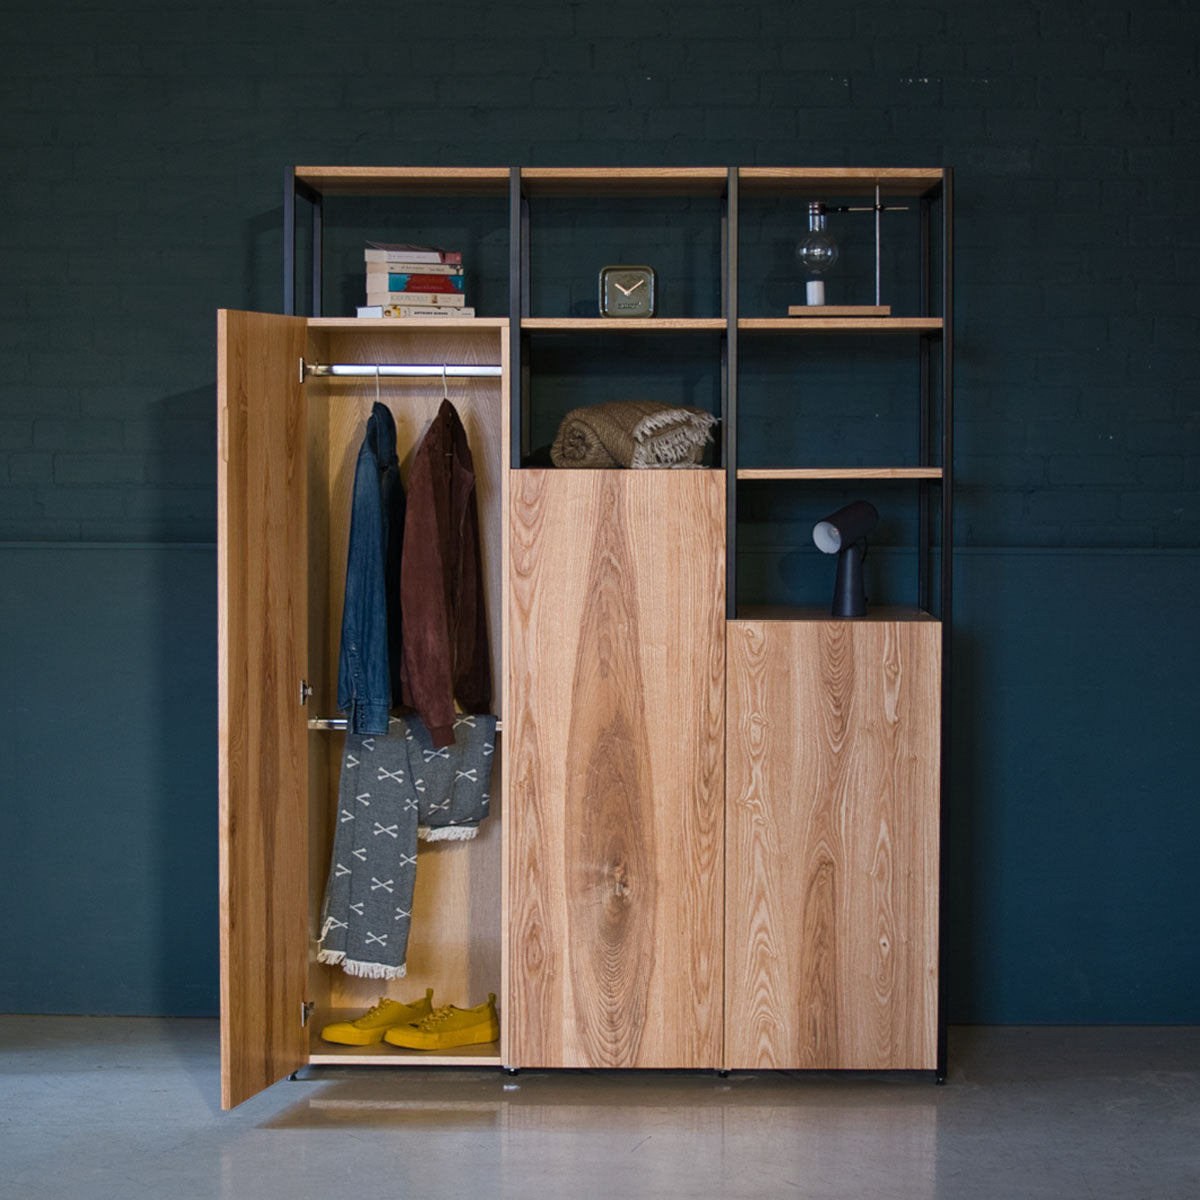 An image of the Wardrobe, Altra product available from Koda Studios